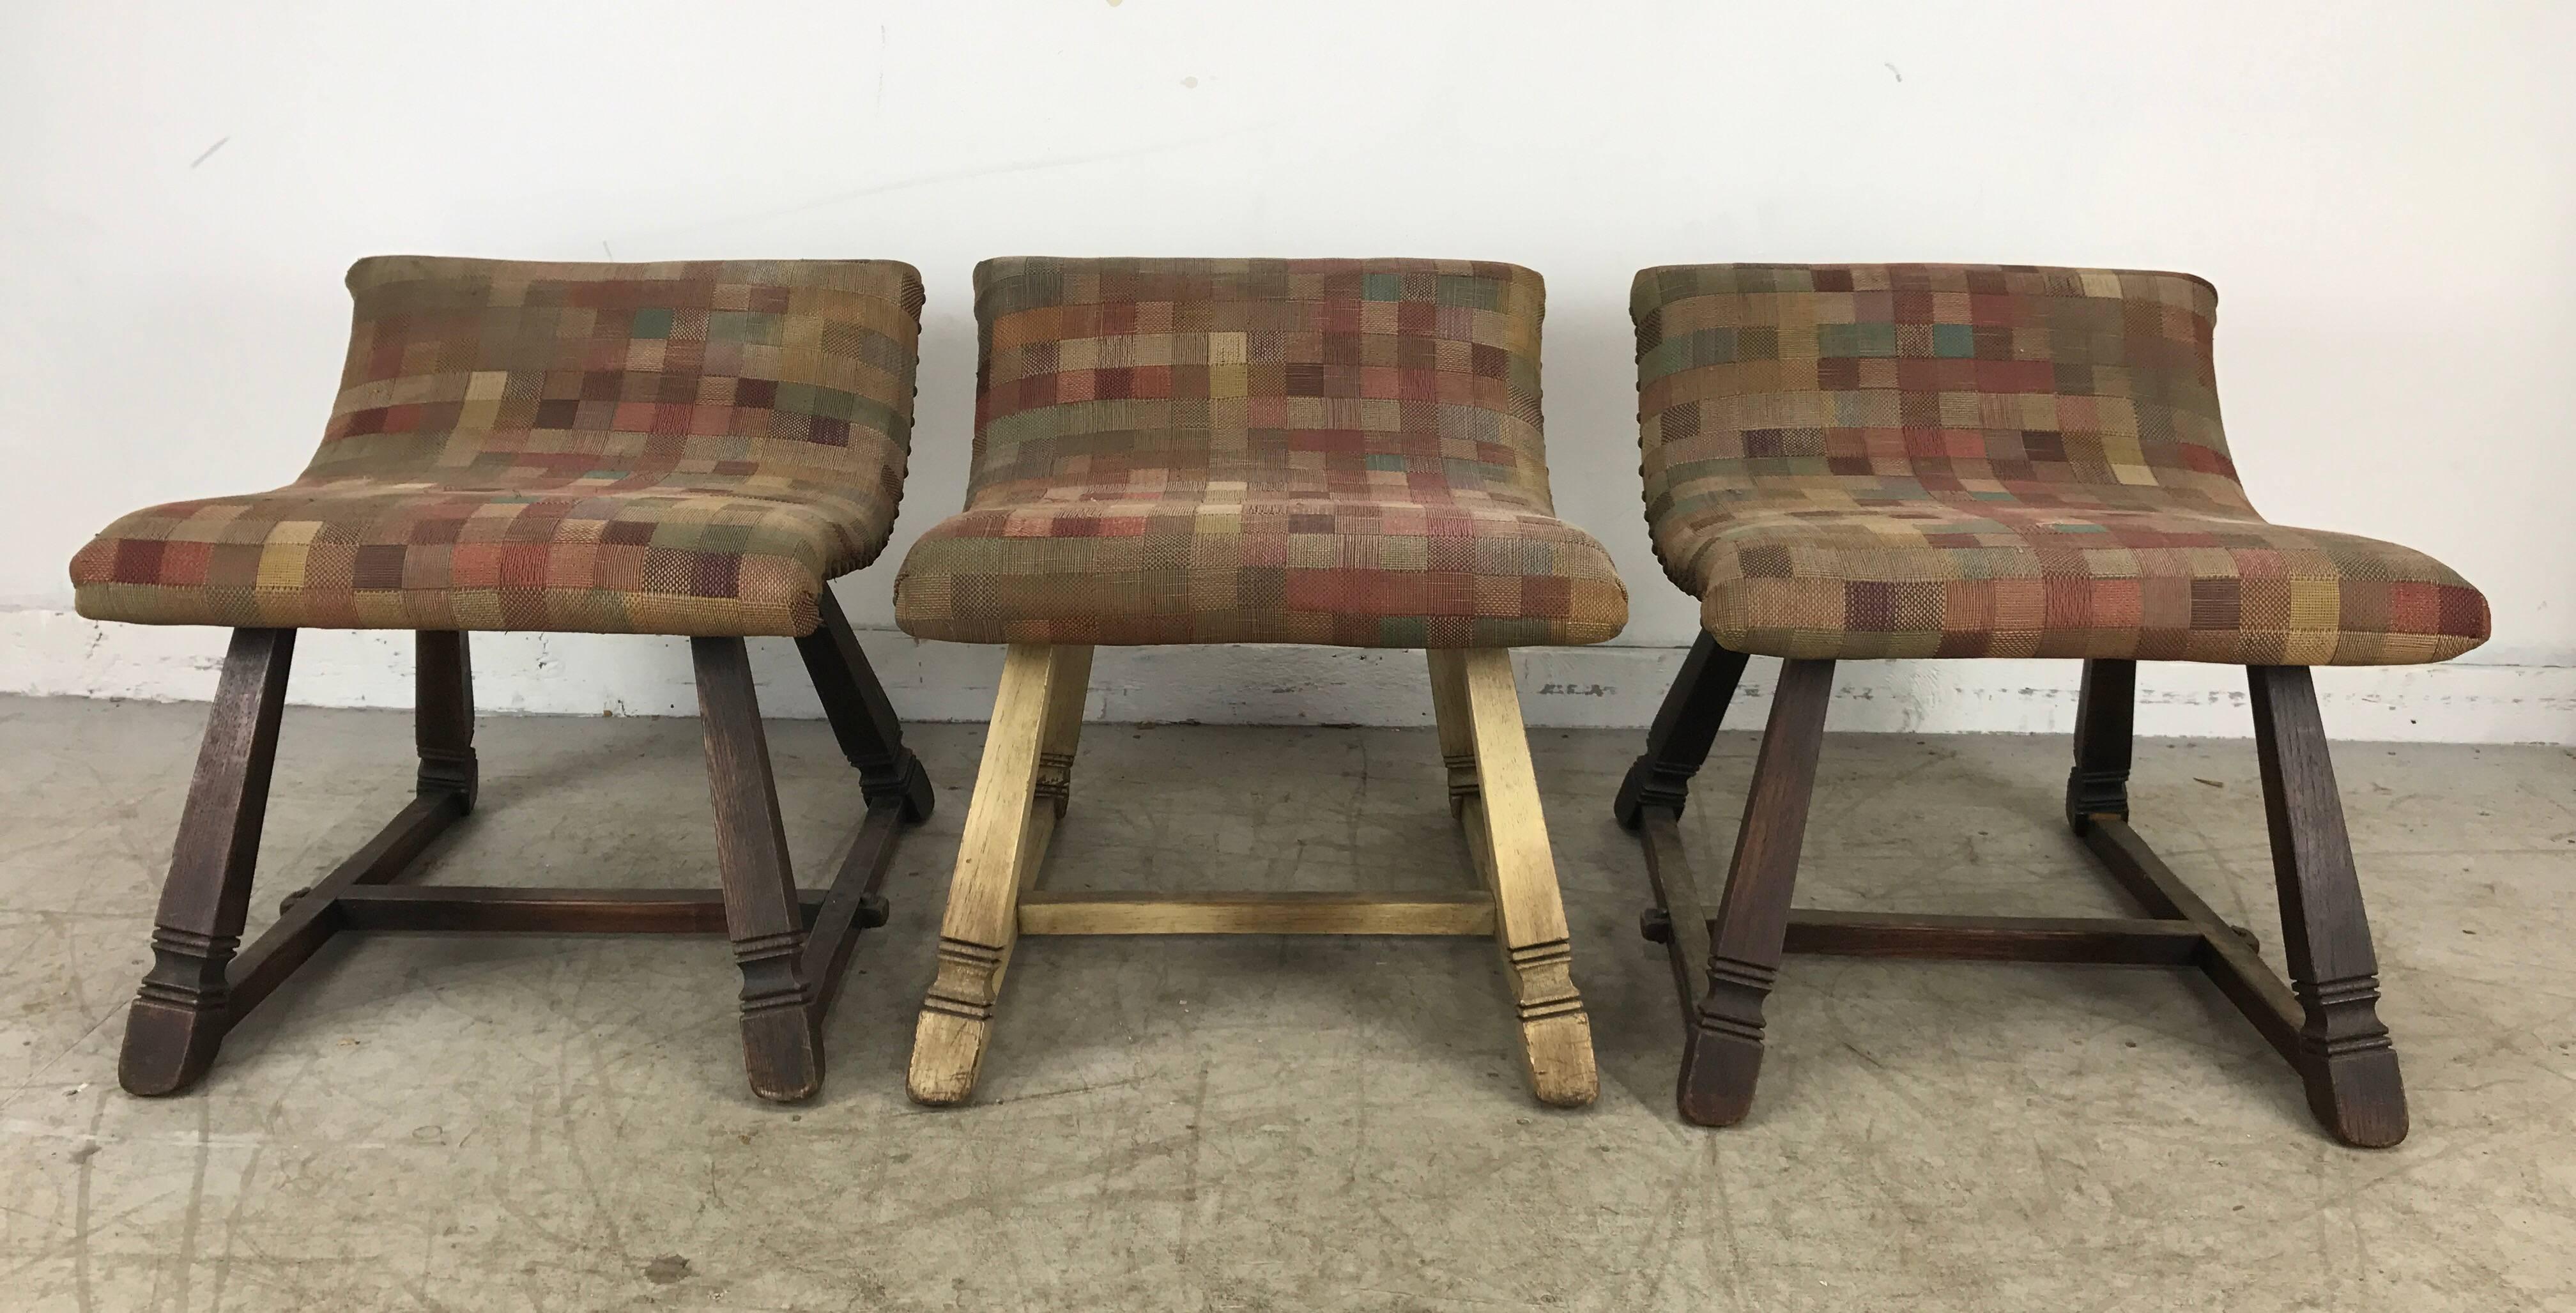 Unusual set of three oak and fabric parlor / fireside stools /benches made by The Romweber Co. Feudal oak 